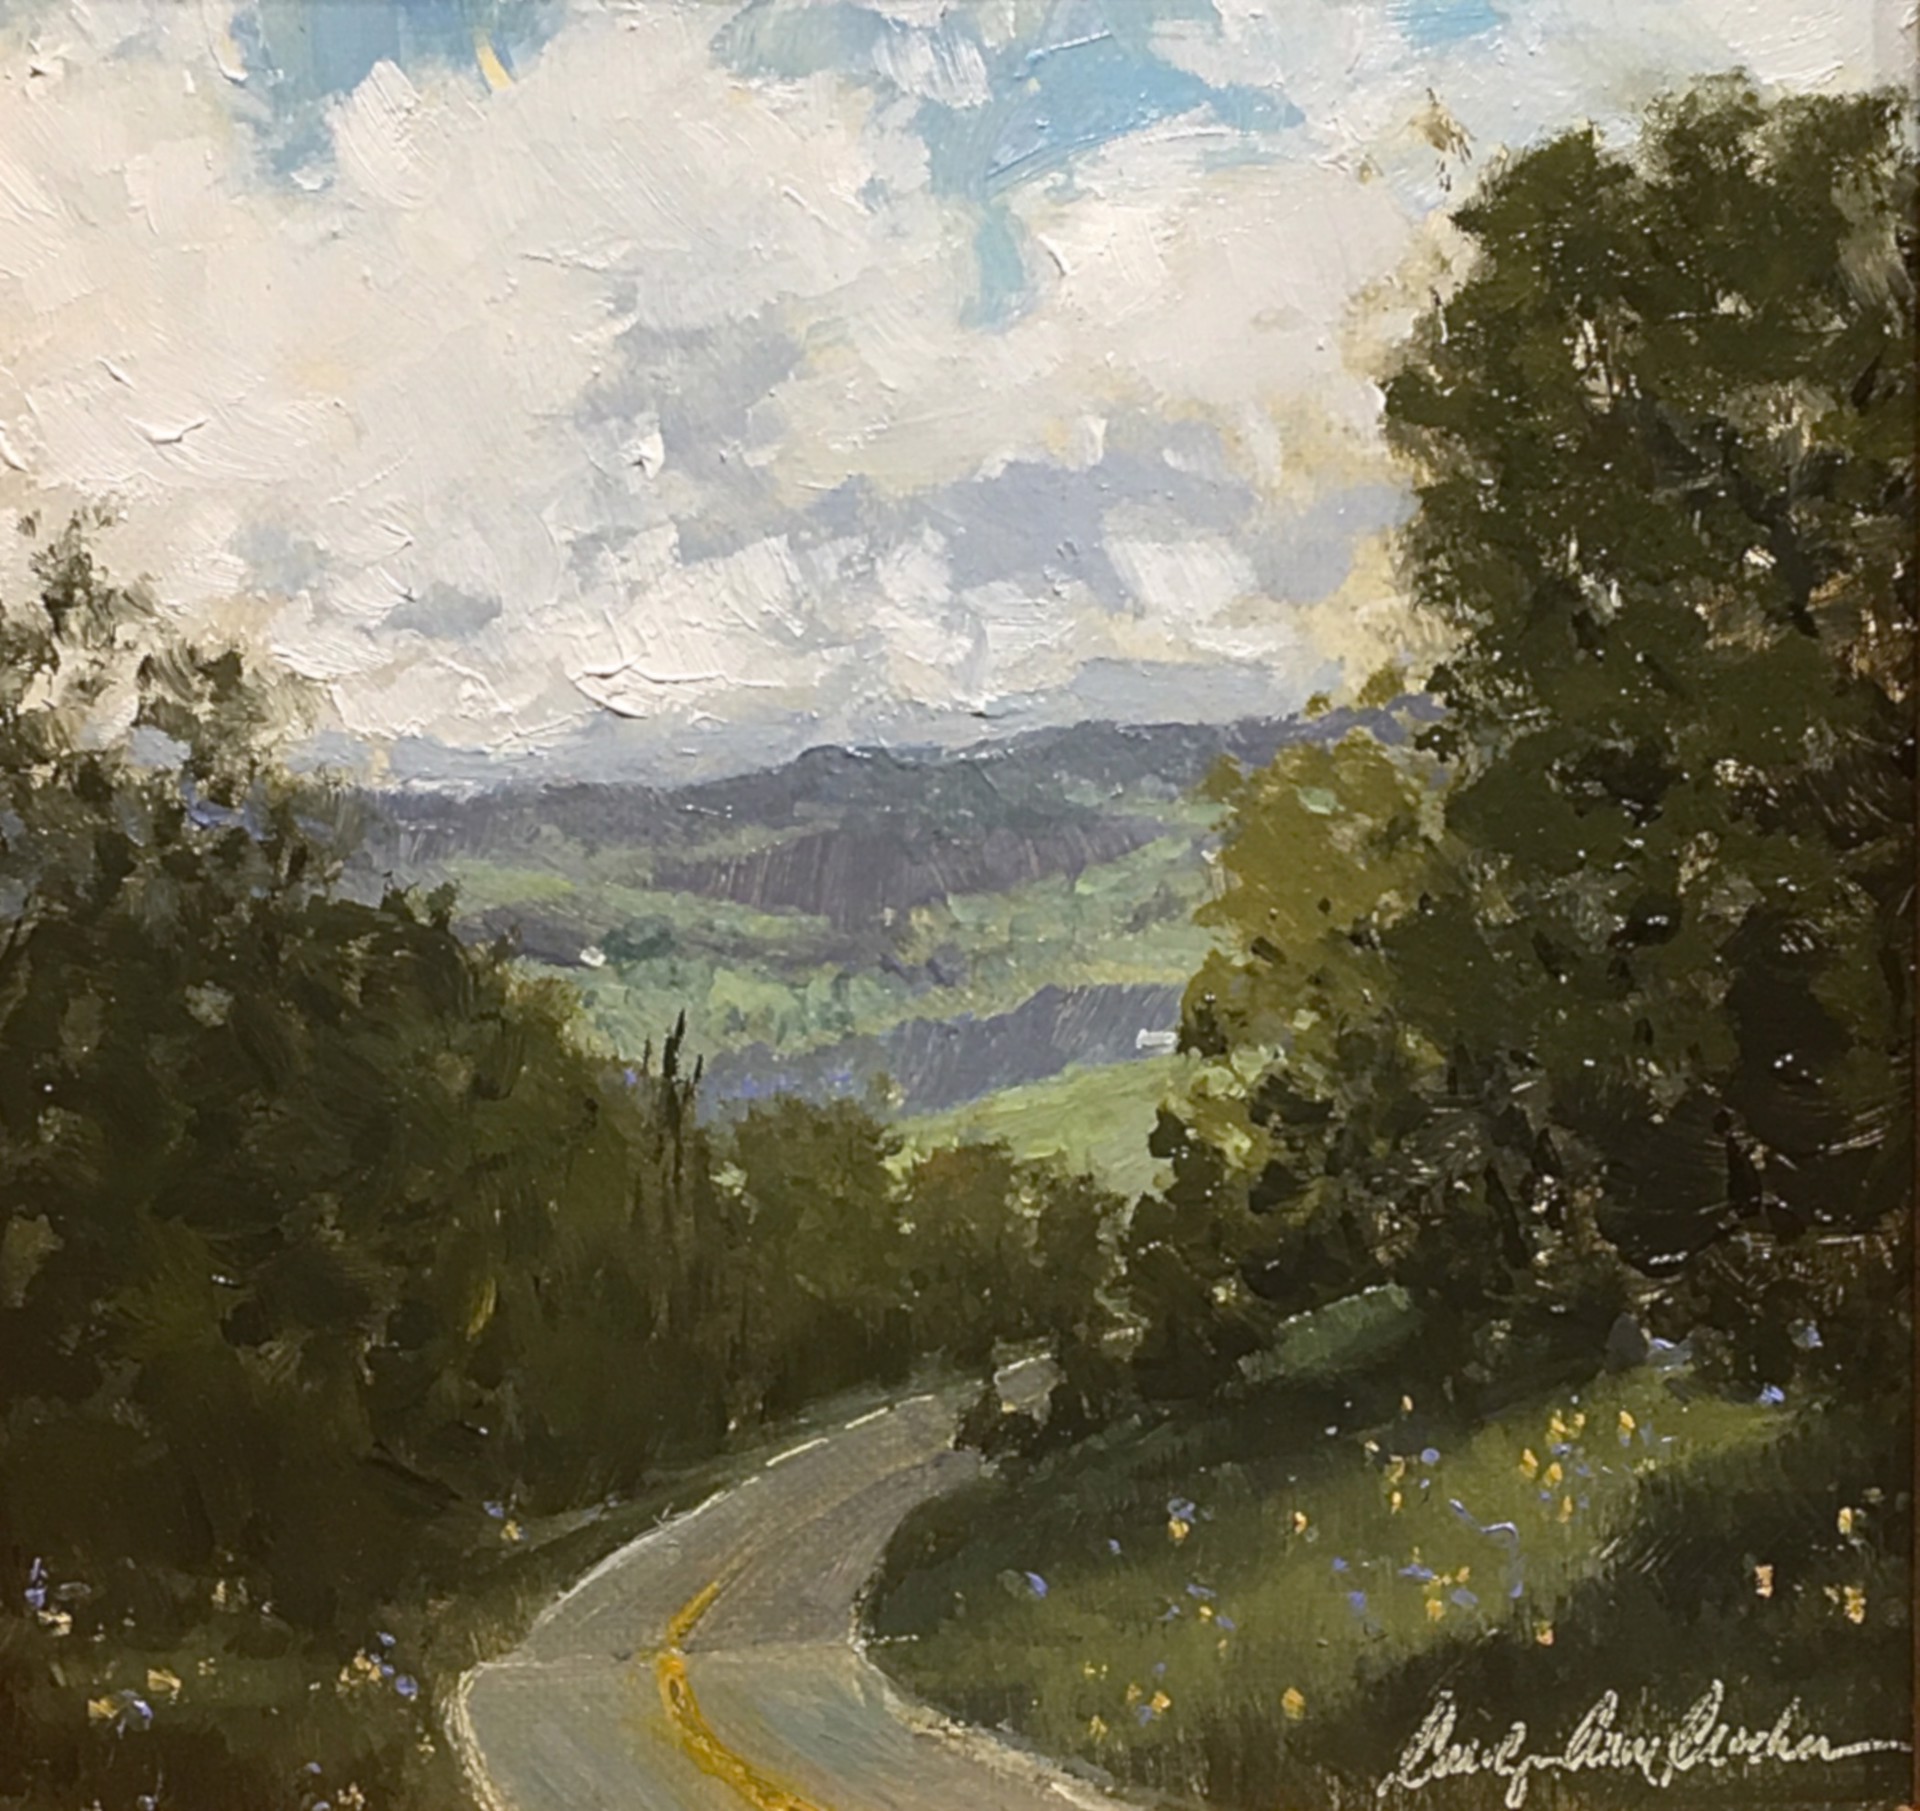 A Drive in the Country by Carolyn Crocker (Rue)